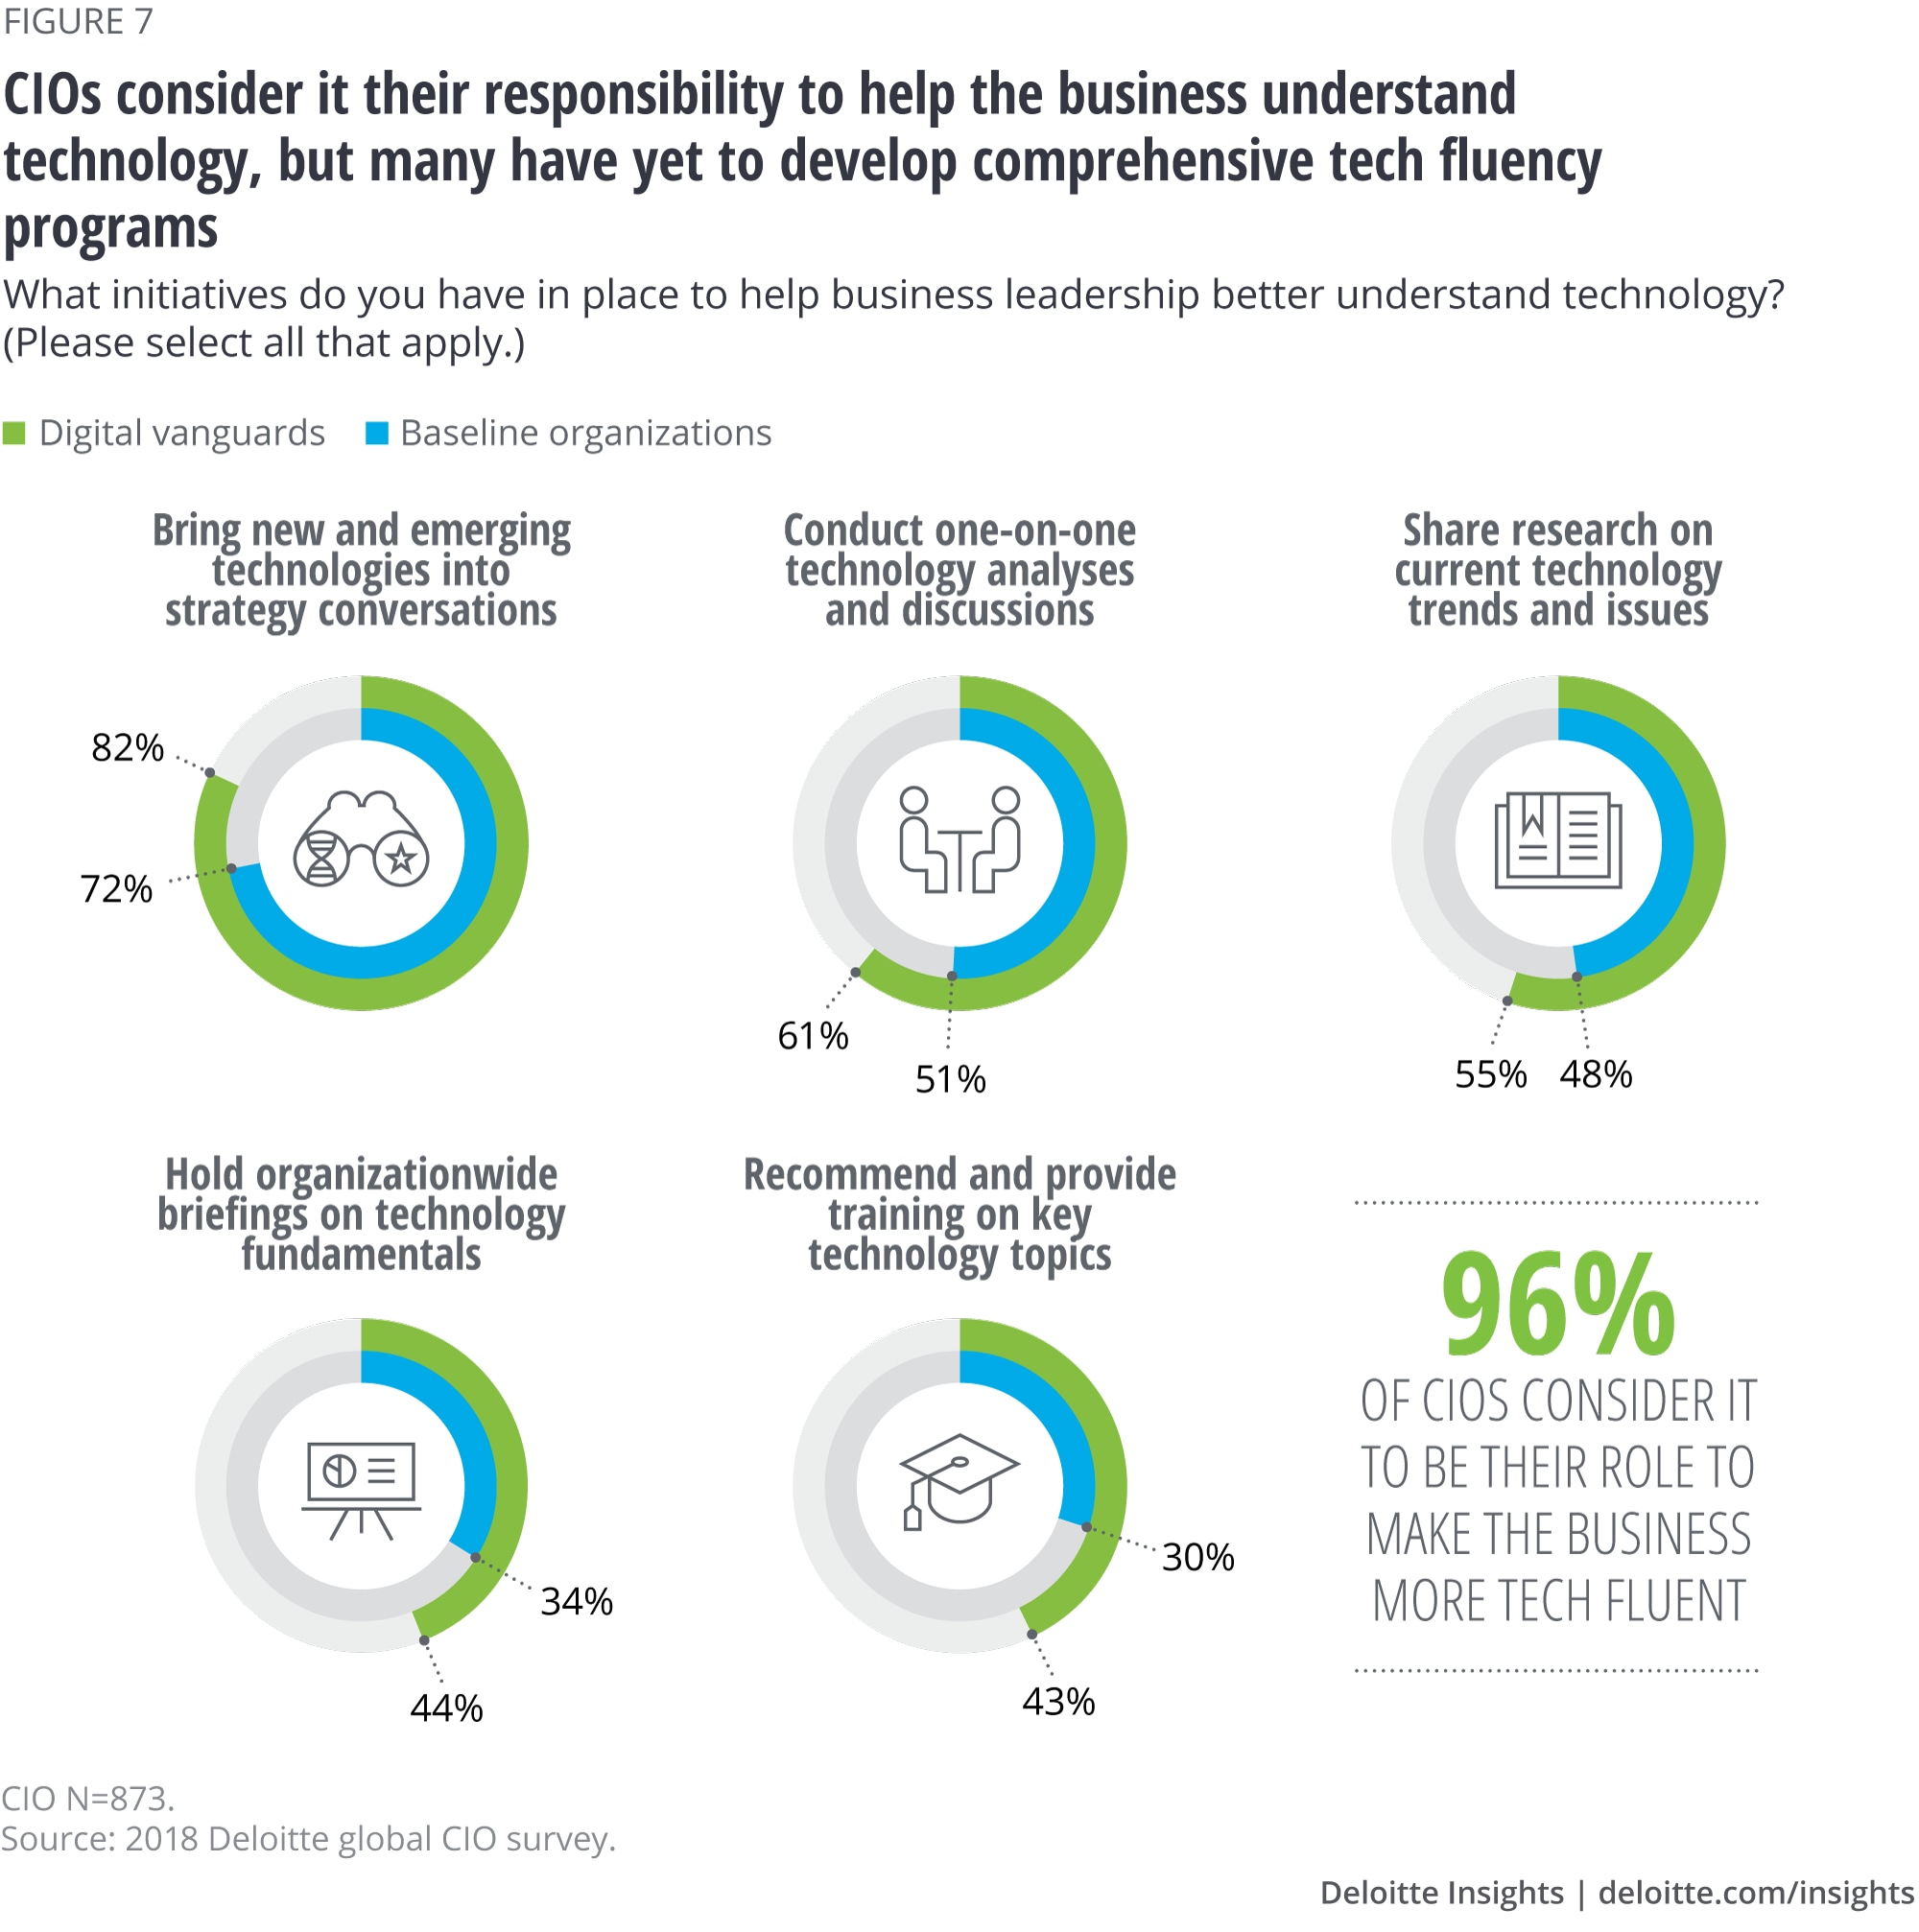 CIOs consider it their responsibility to help the business understand technology, but many have yet to develop comprehensive tech fluency programs